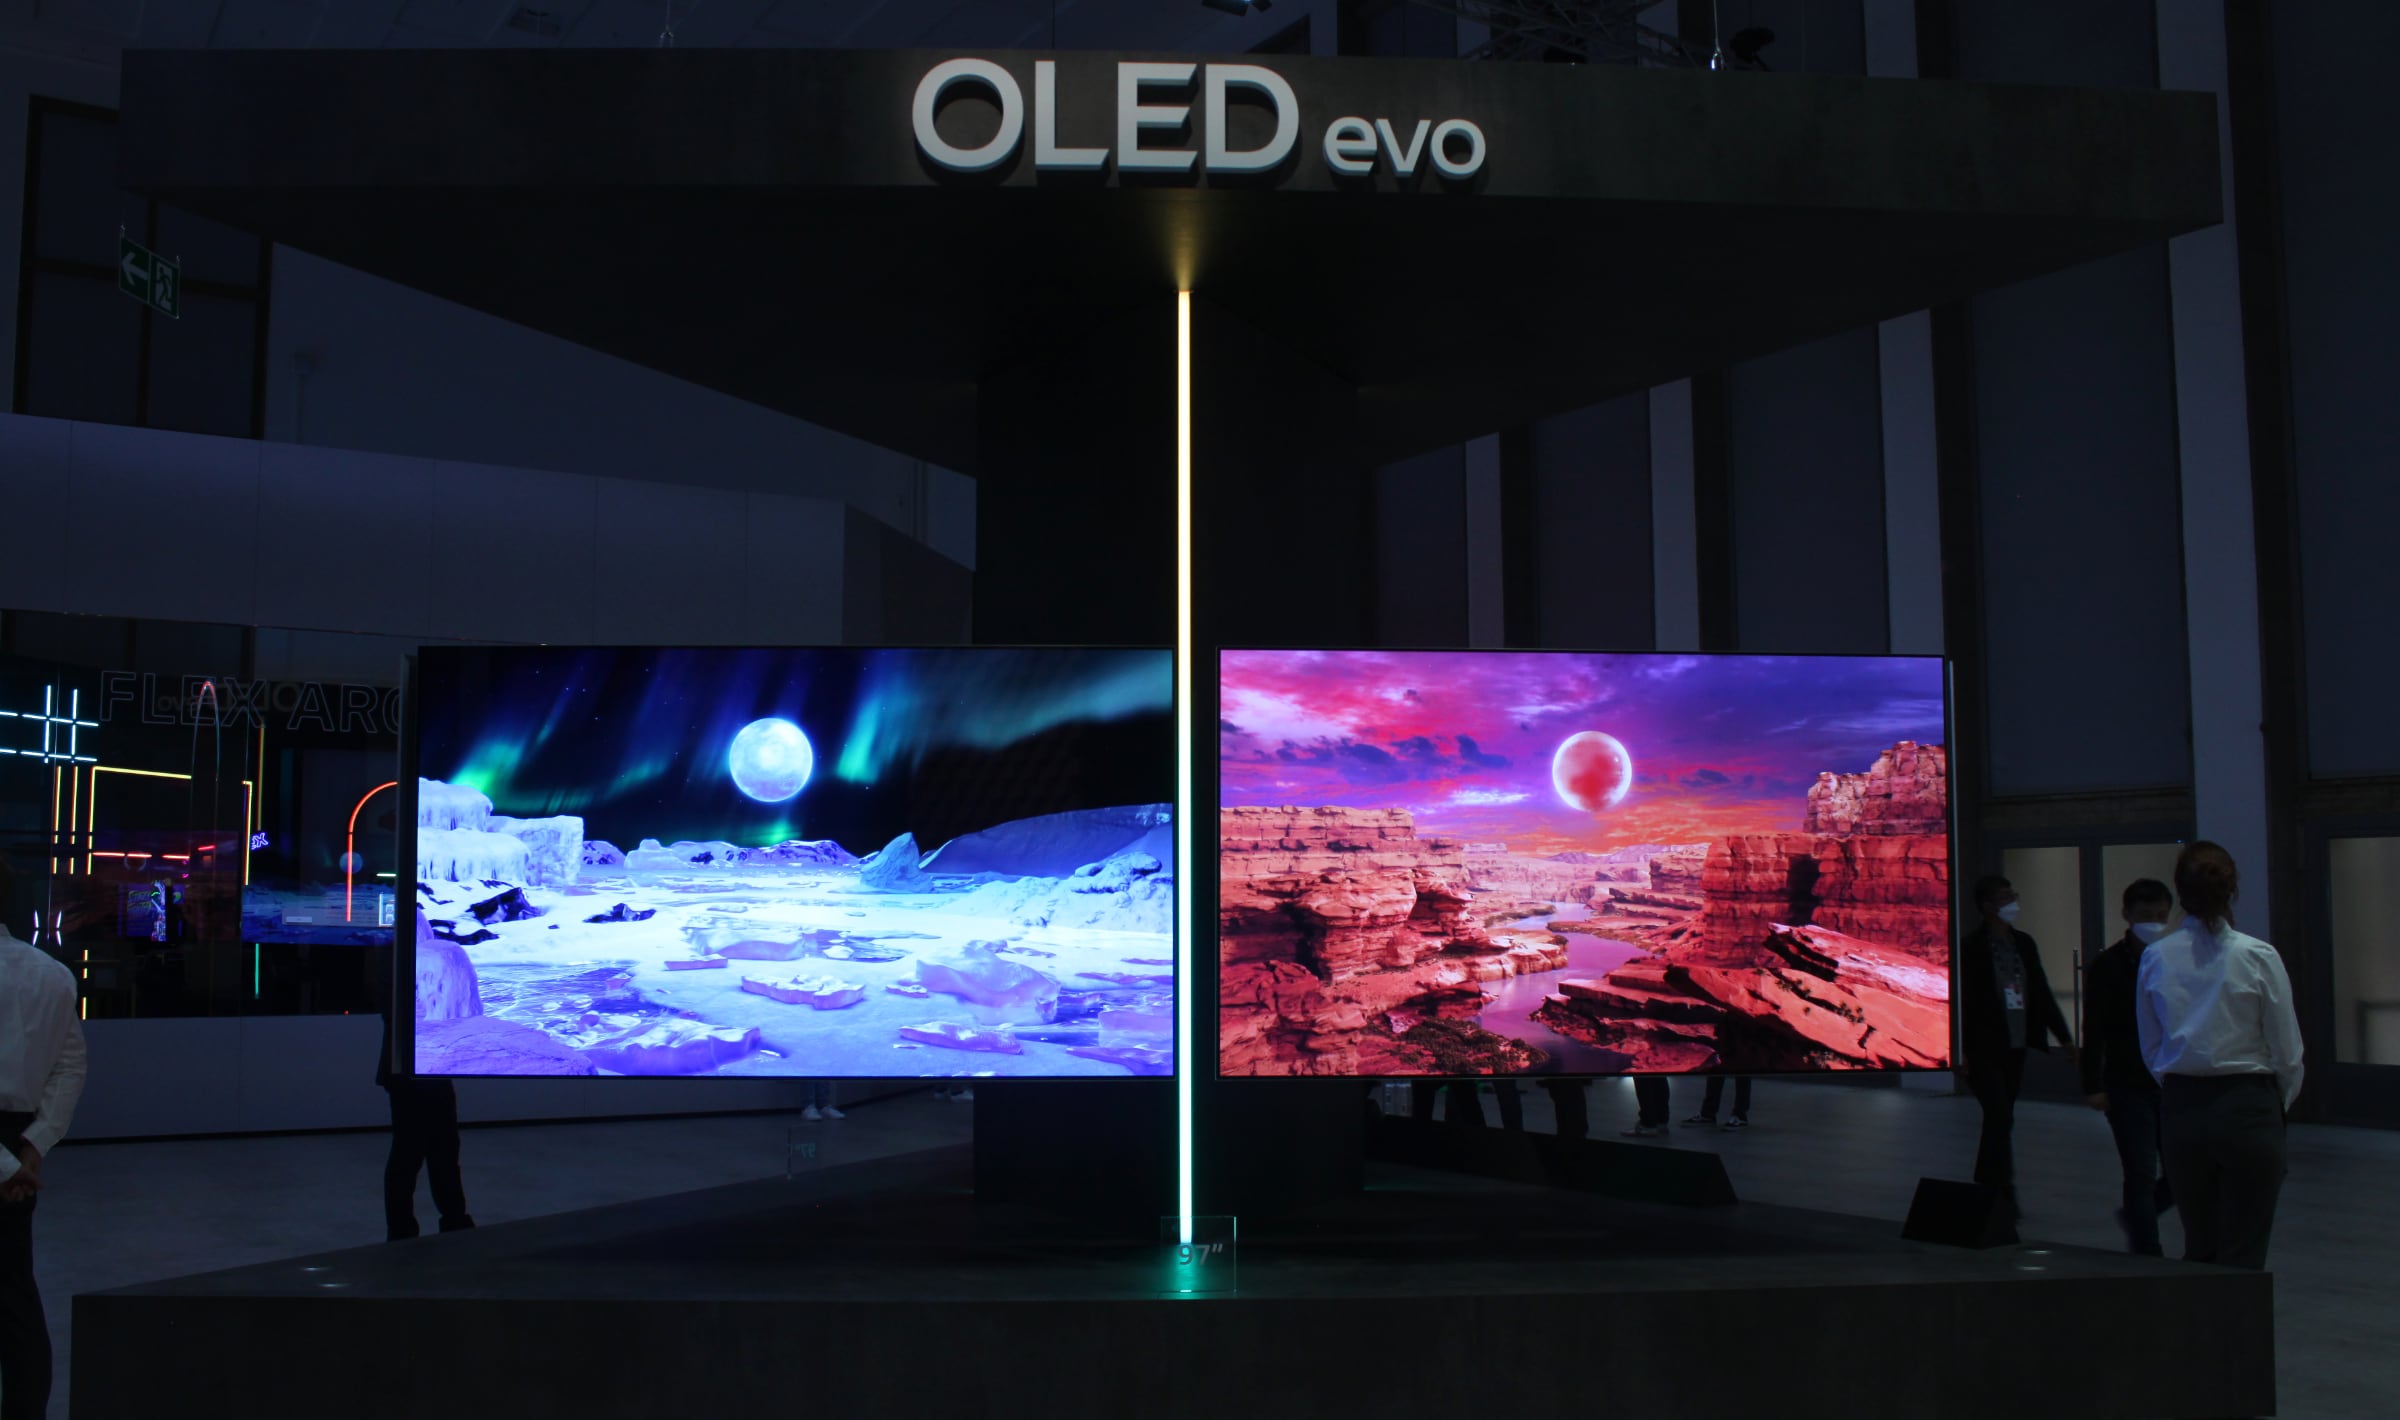 8K TVs are here, and they're totally pointless